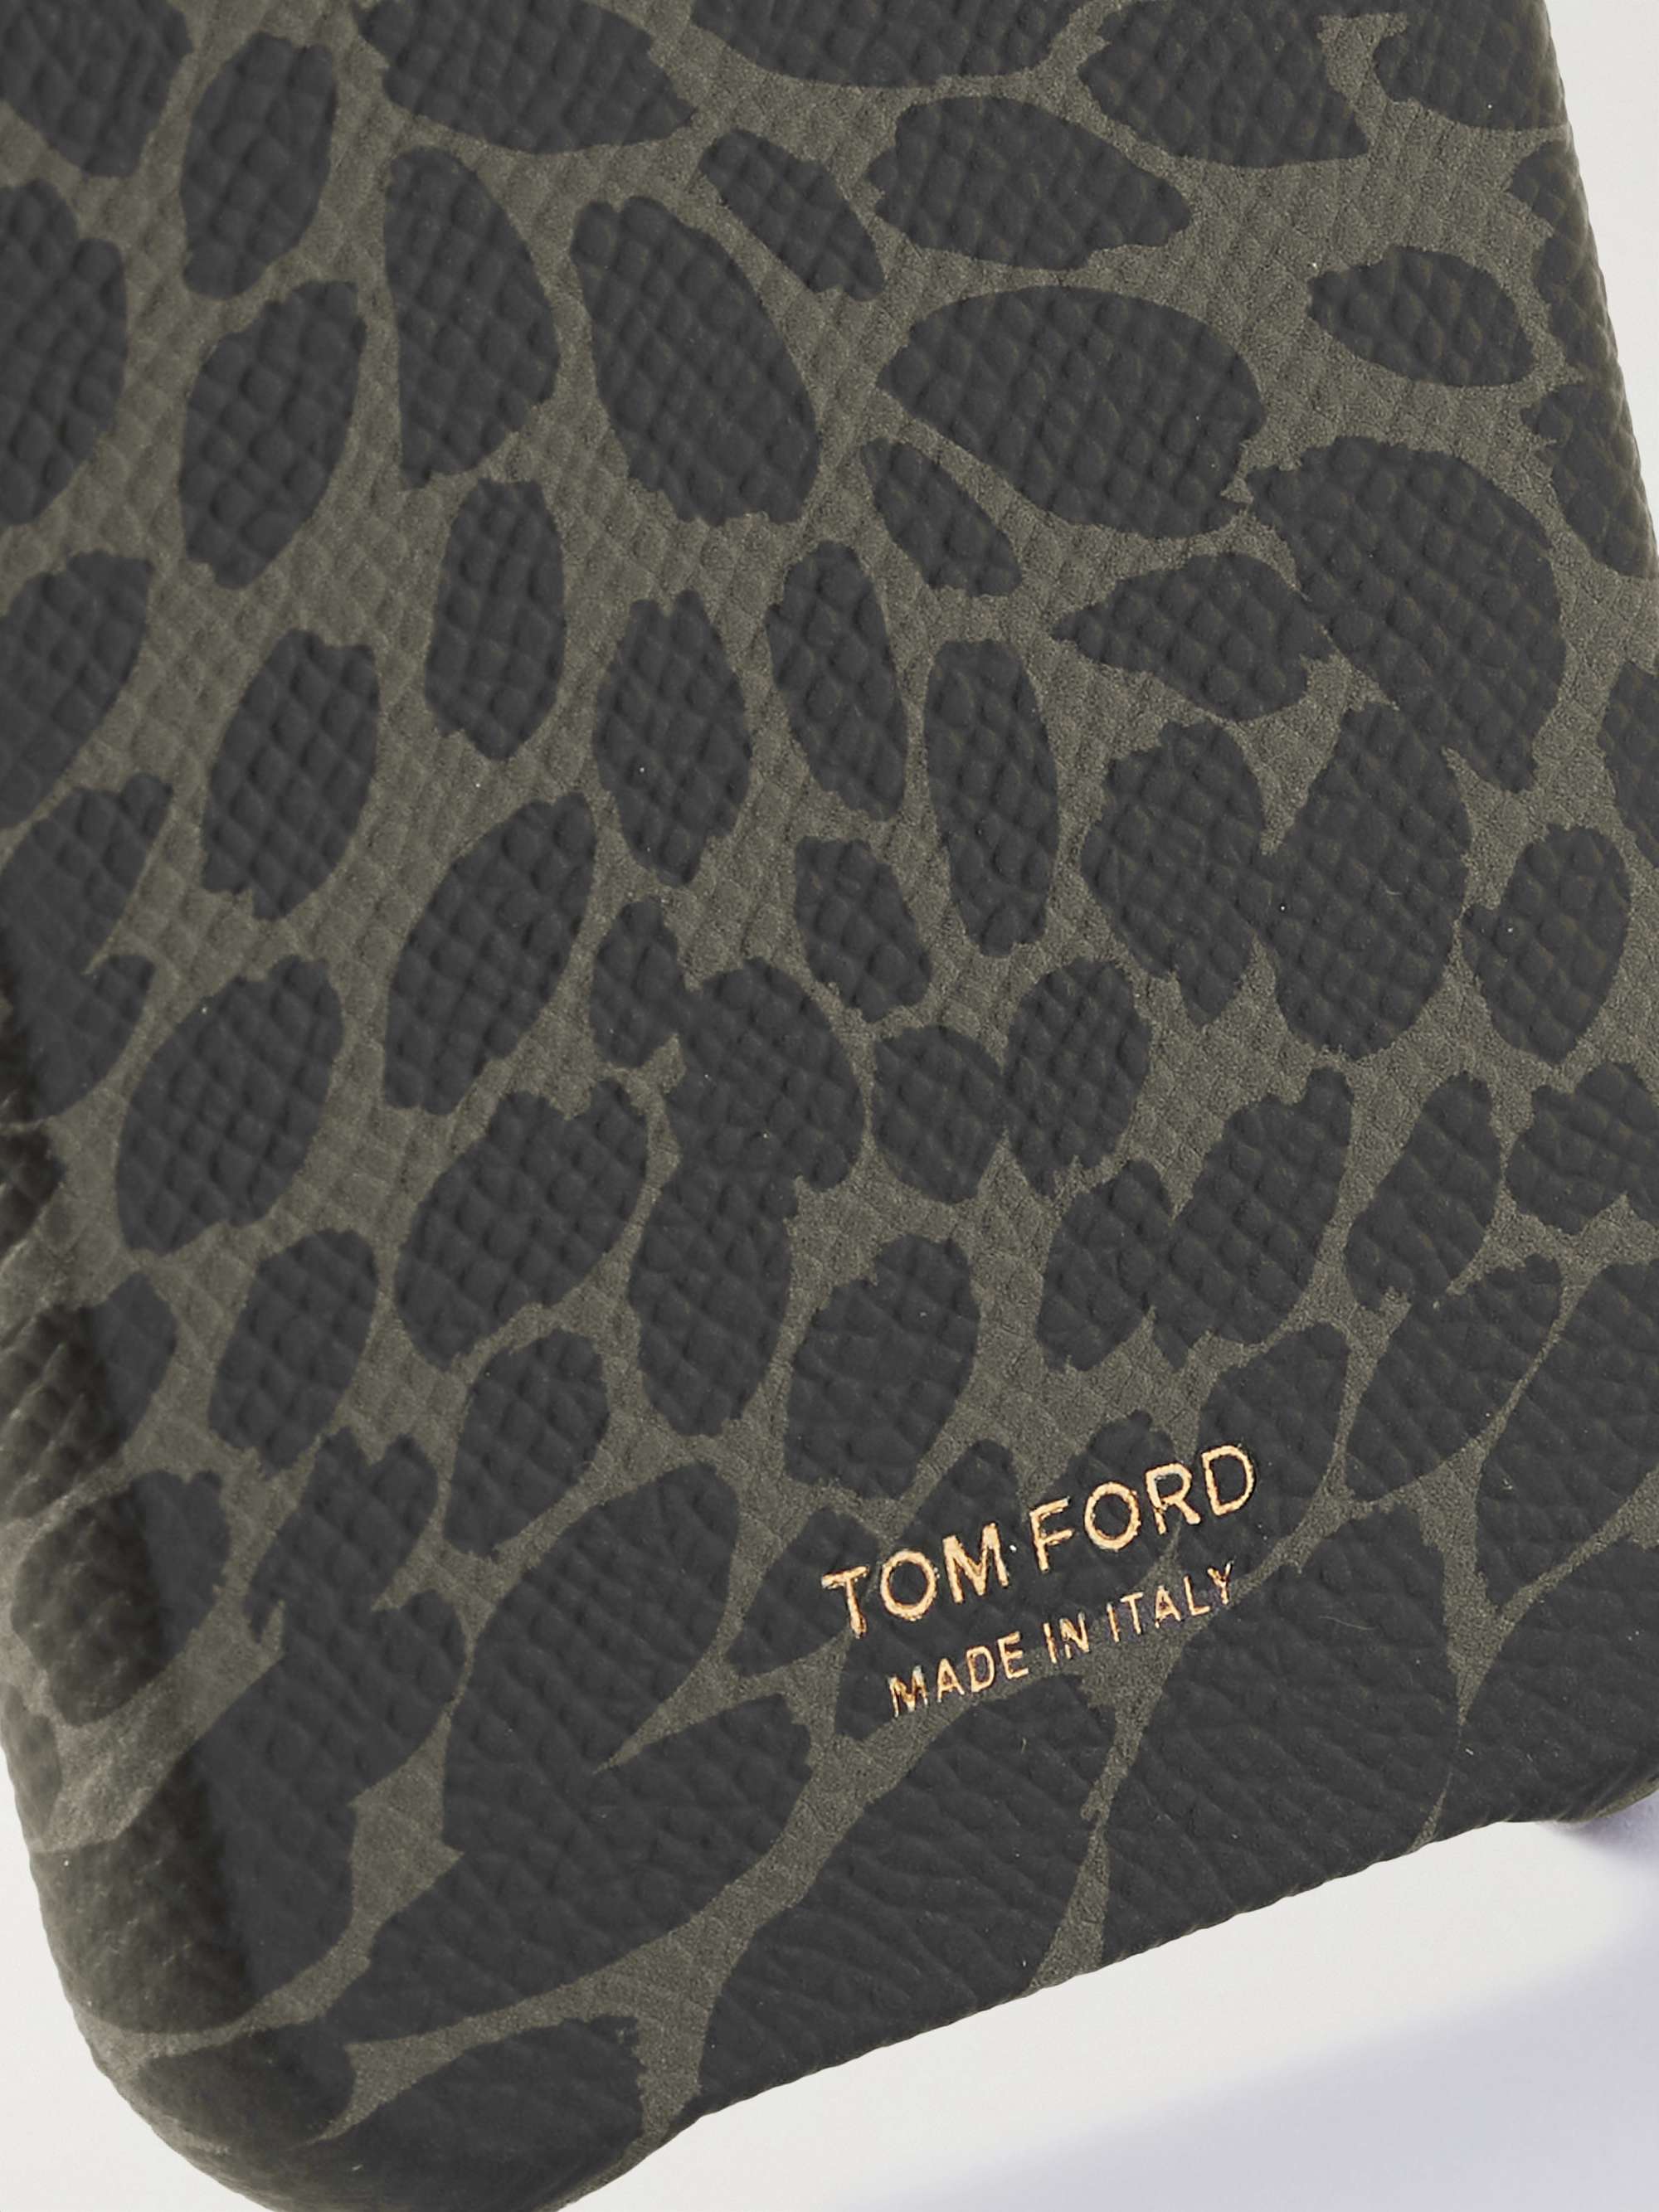 TOM FORD Full-Grain Leather iPhone 12 Pro Case